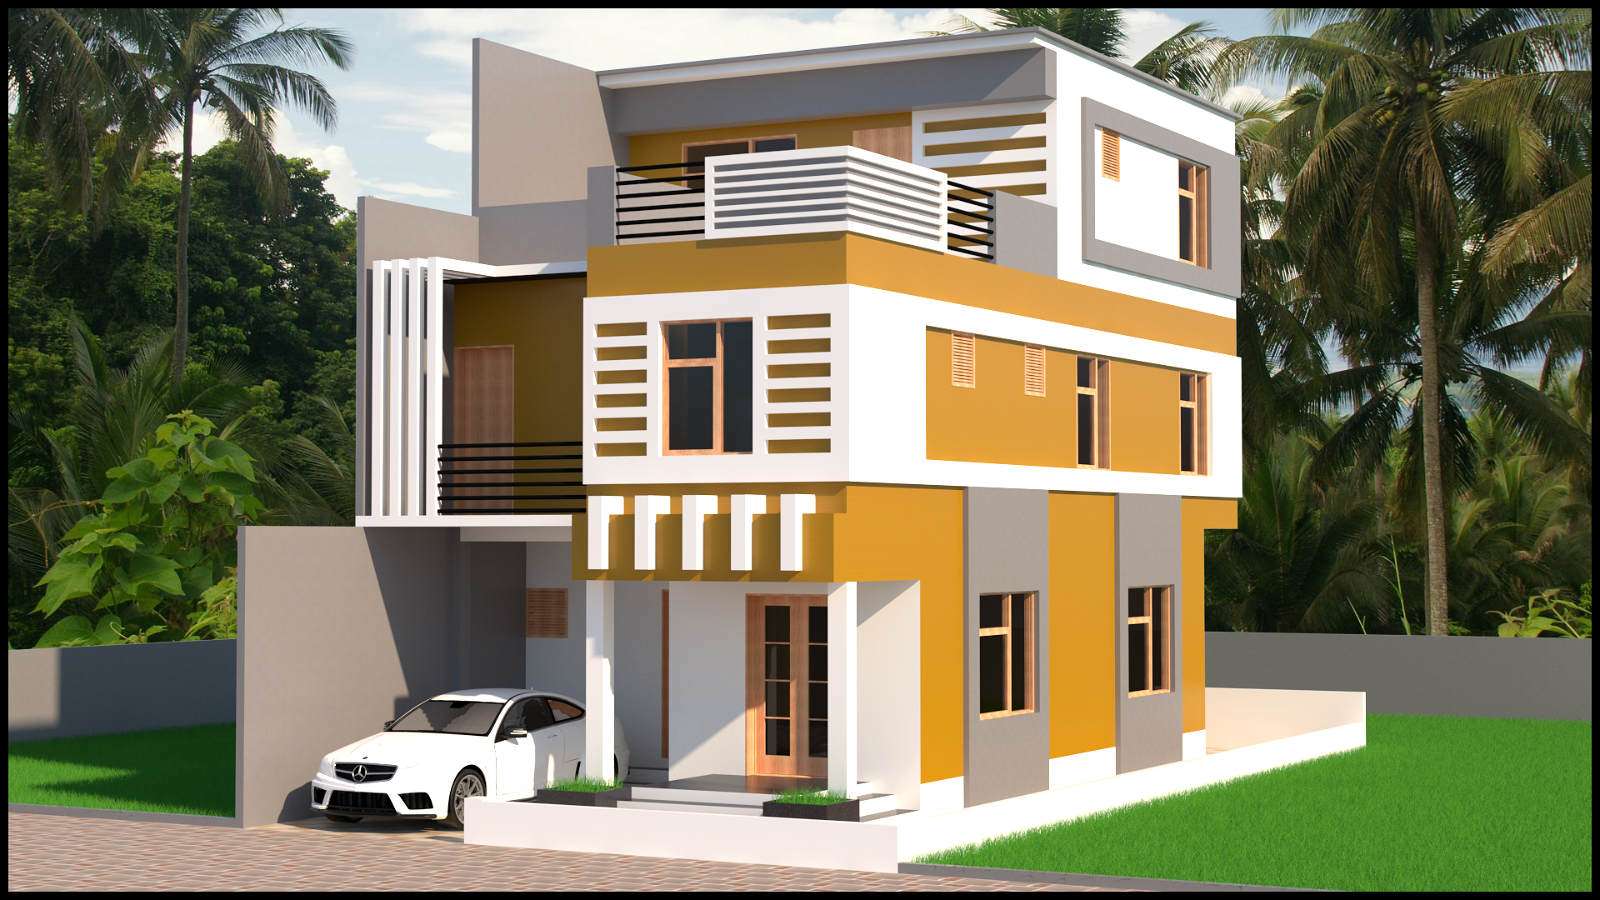 G+2 3d house elevation design Revit drawing file is given here